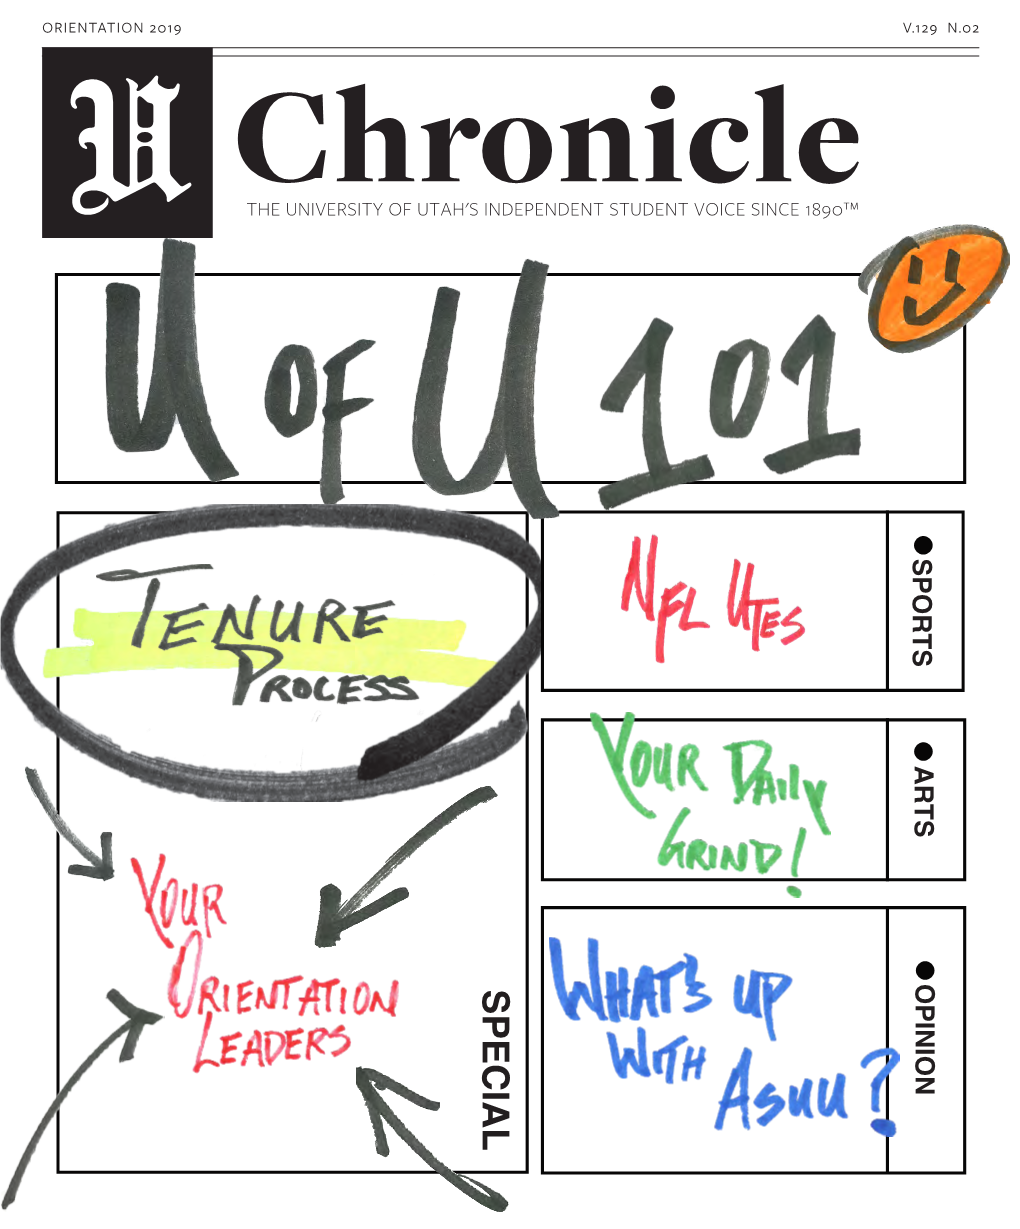 SPECIAL 19 AFCU Utahchronicle.Pdf 1 5/8/19 2:57 PM